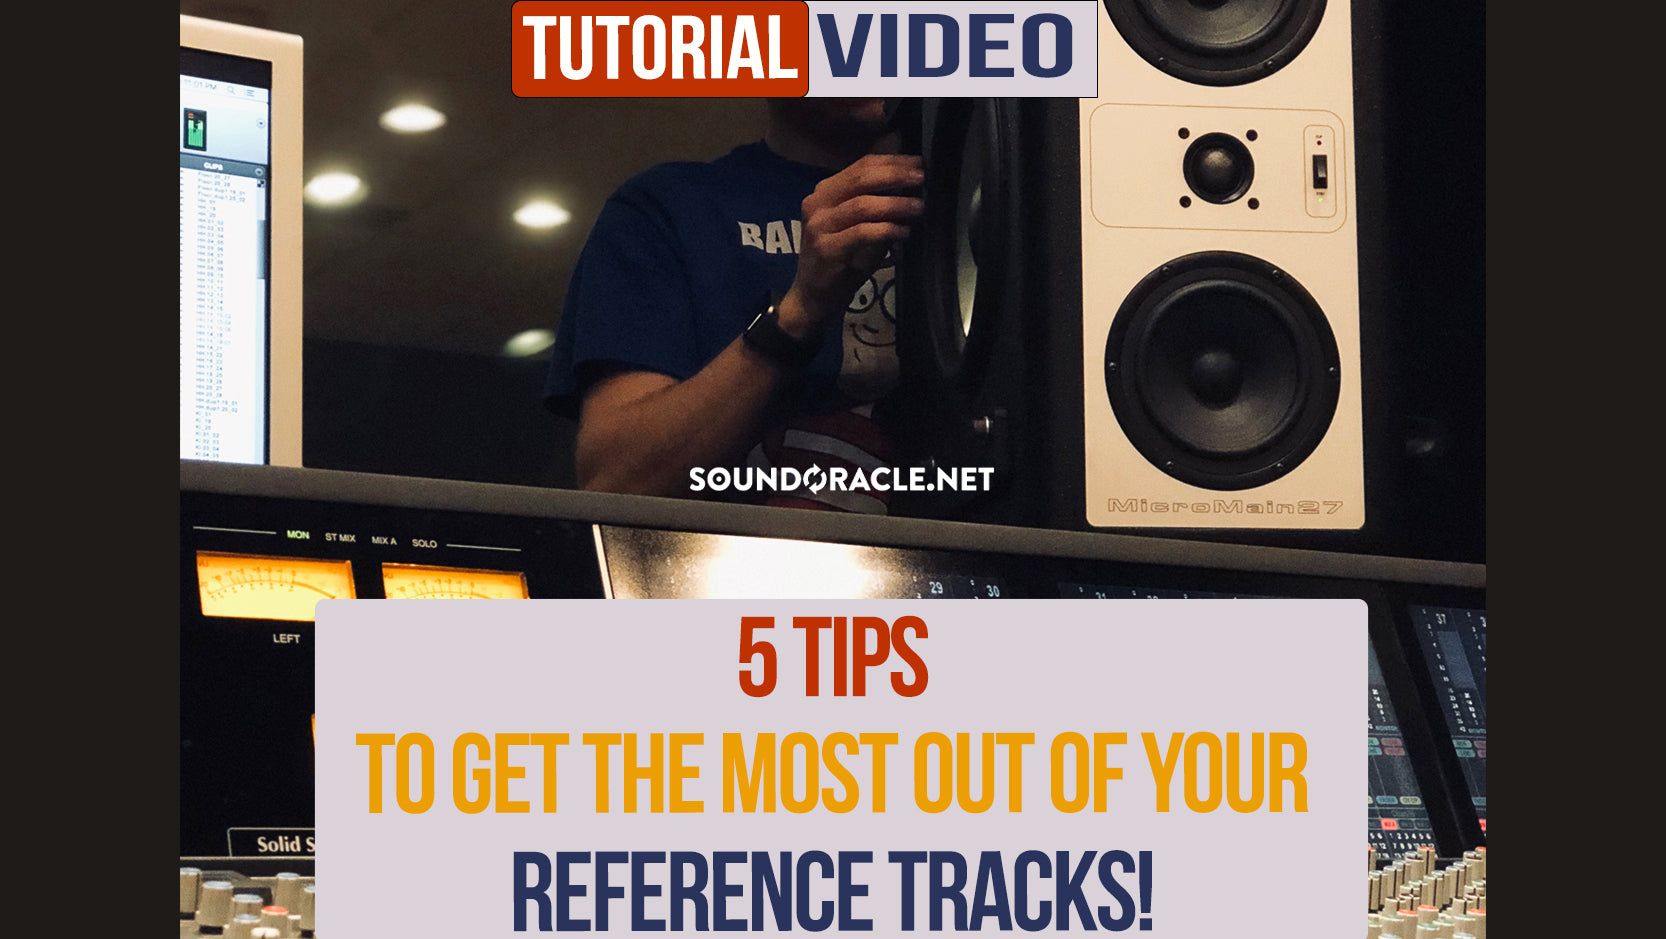 5 Tips To Get The Most Out Of Your Reference Tracks!